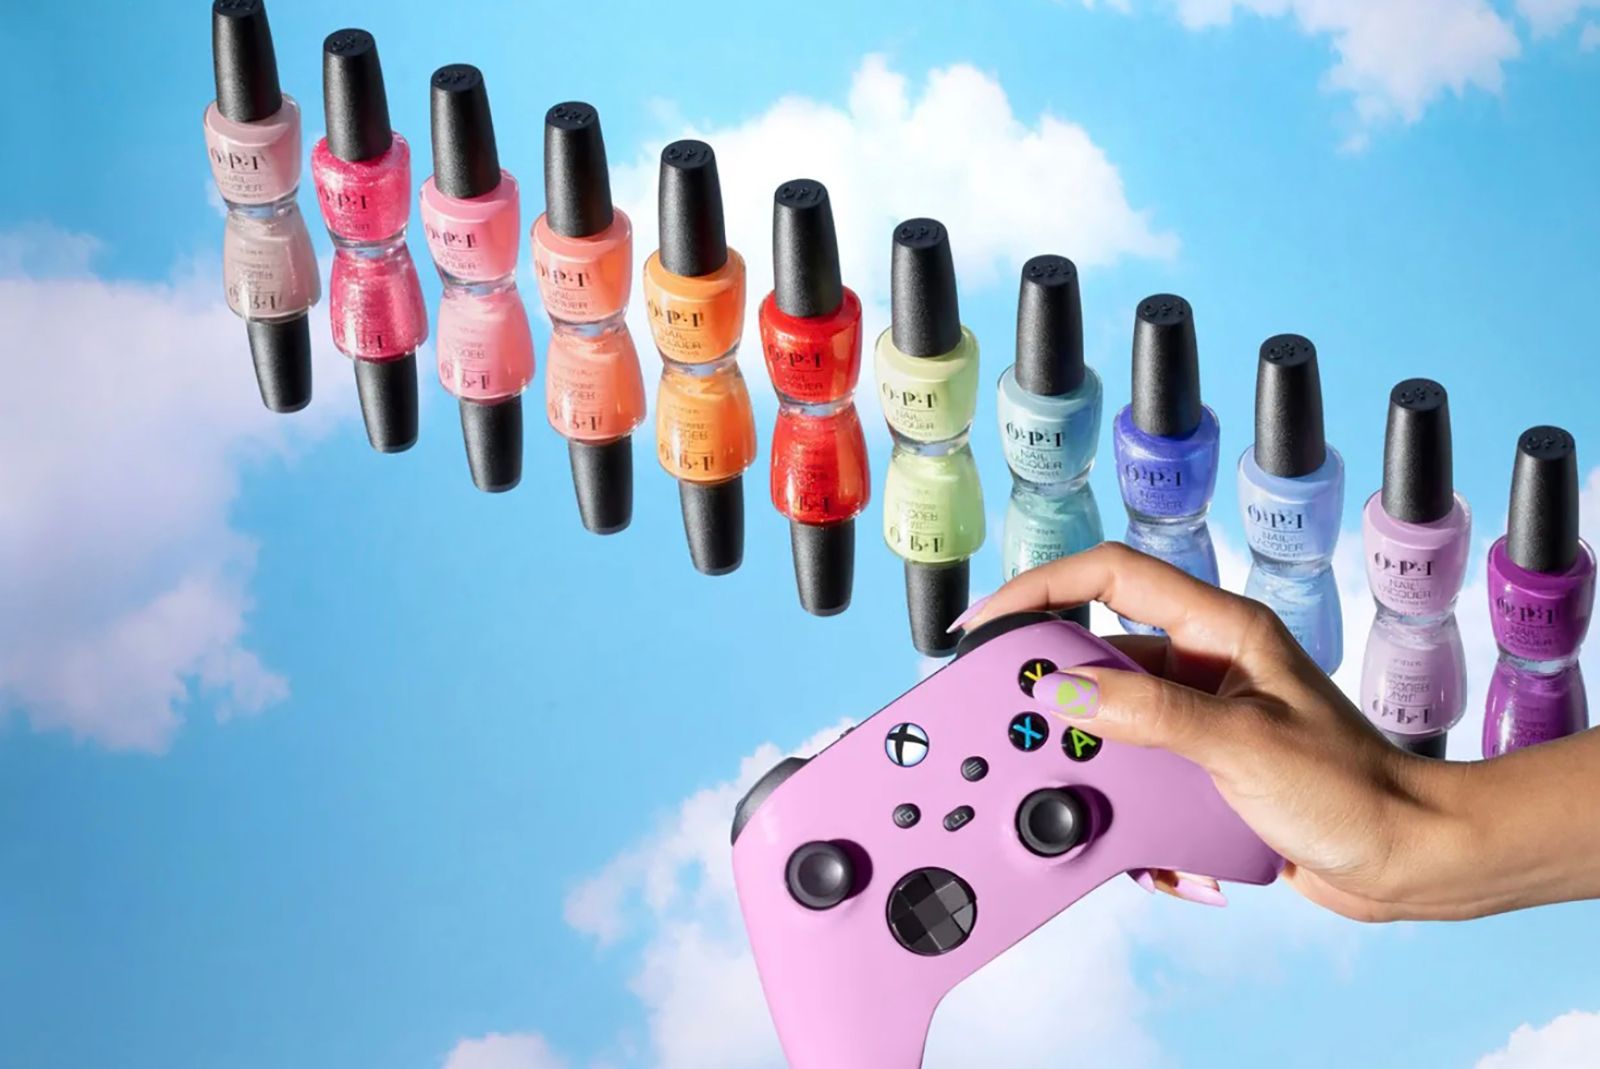 OPI made 12 Xbox-inspired nail polishes that unlock in-game content photo 1